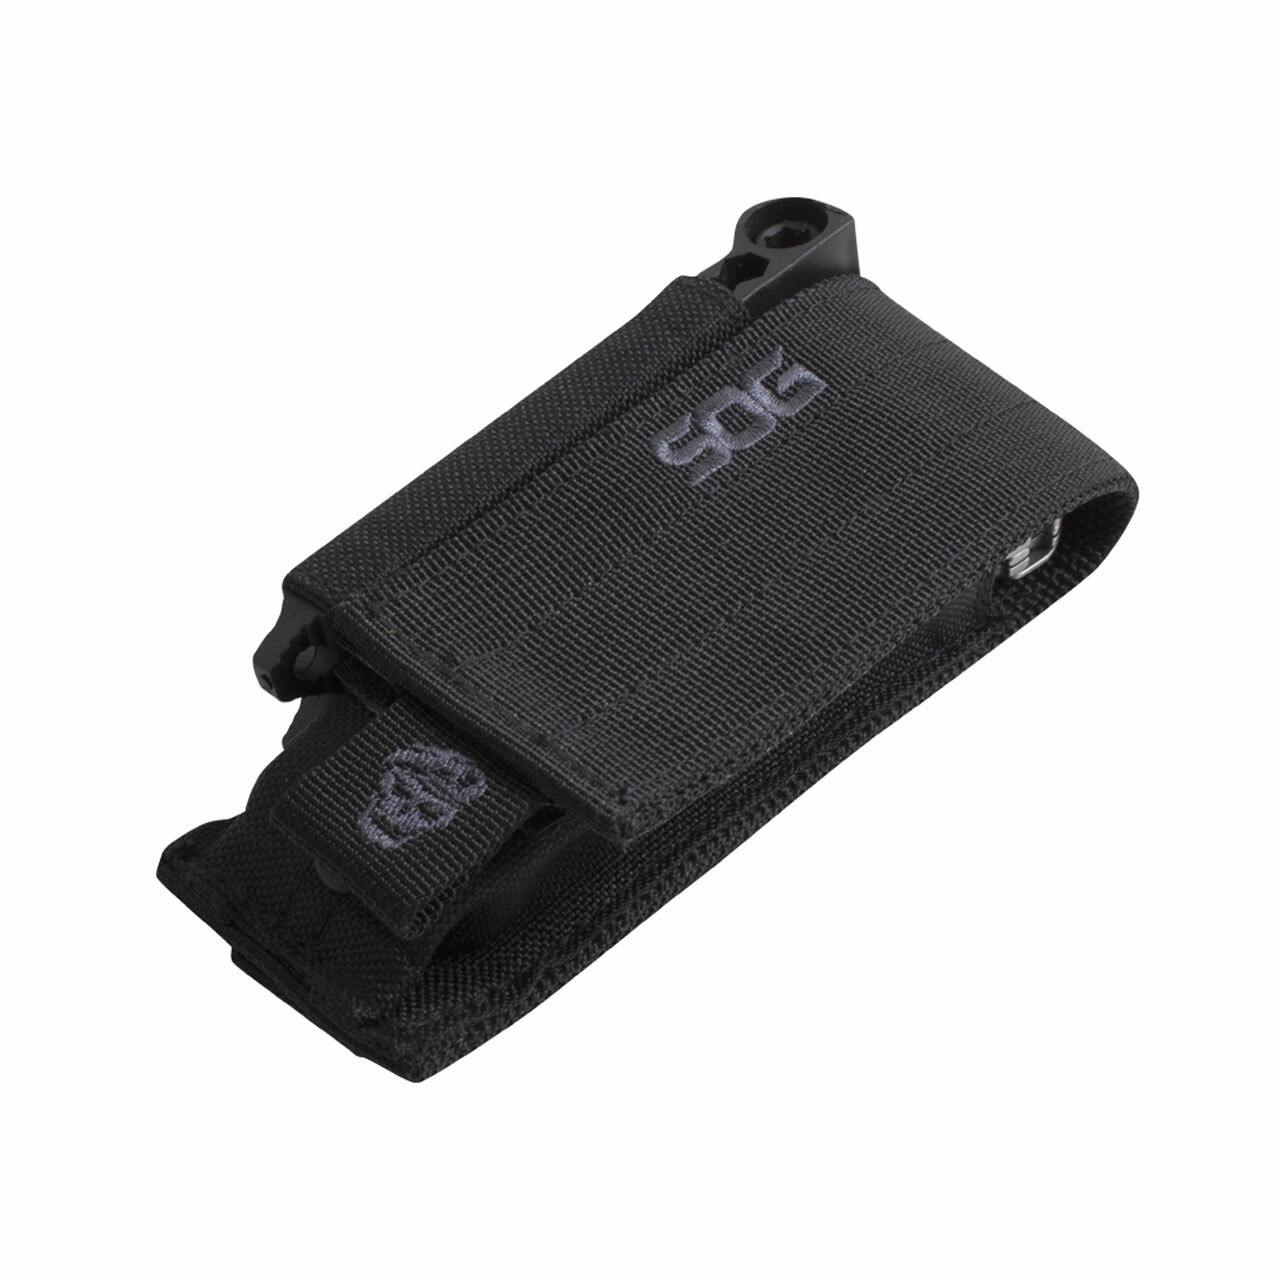 SOG Poweraccess Assist MT - Leapfrog Outdoor Sports and Apparel